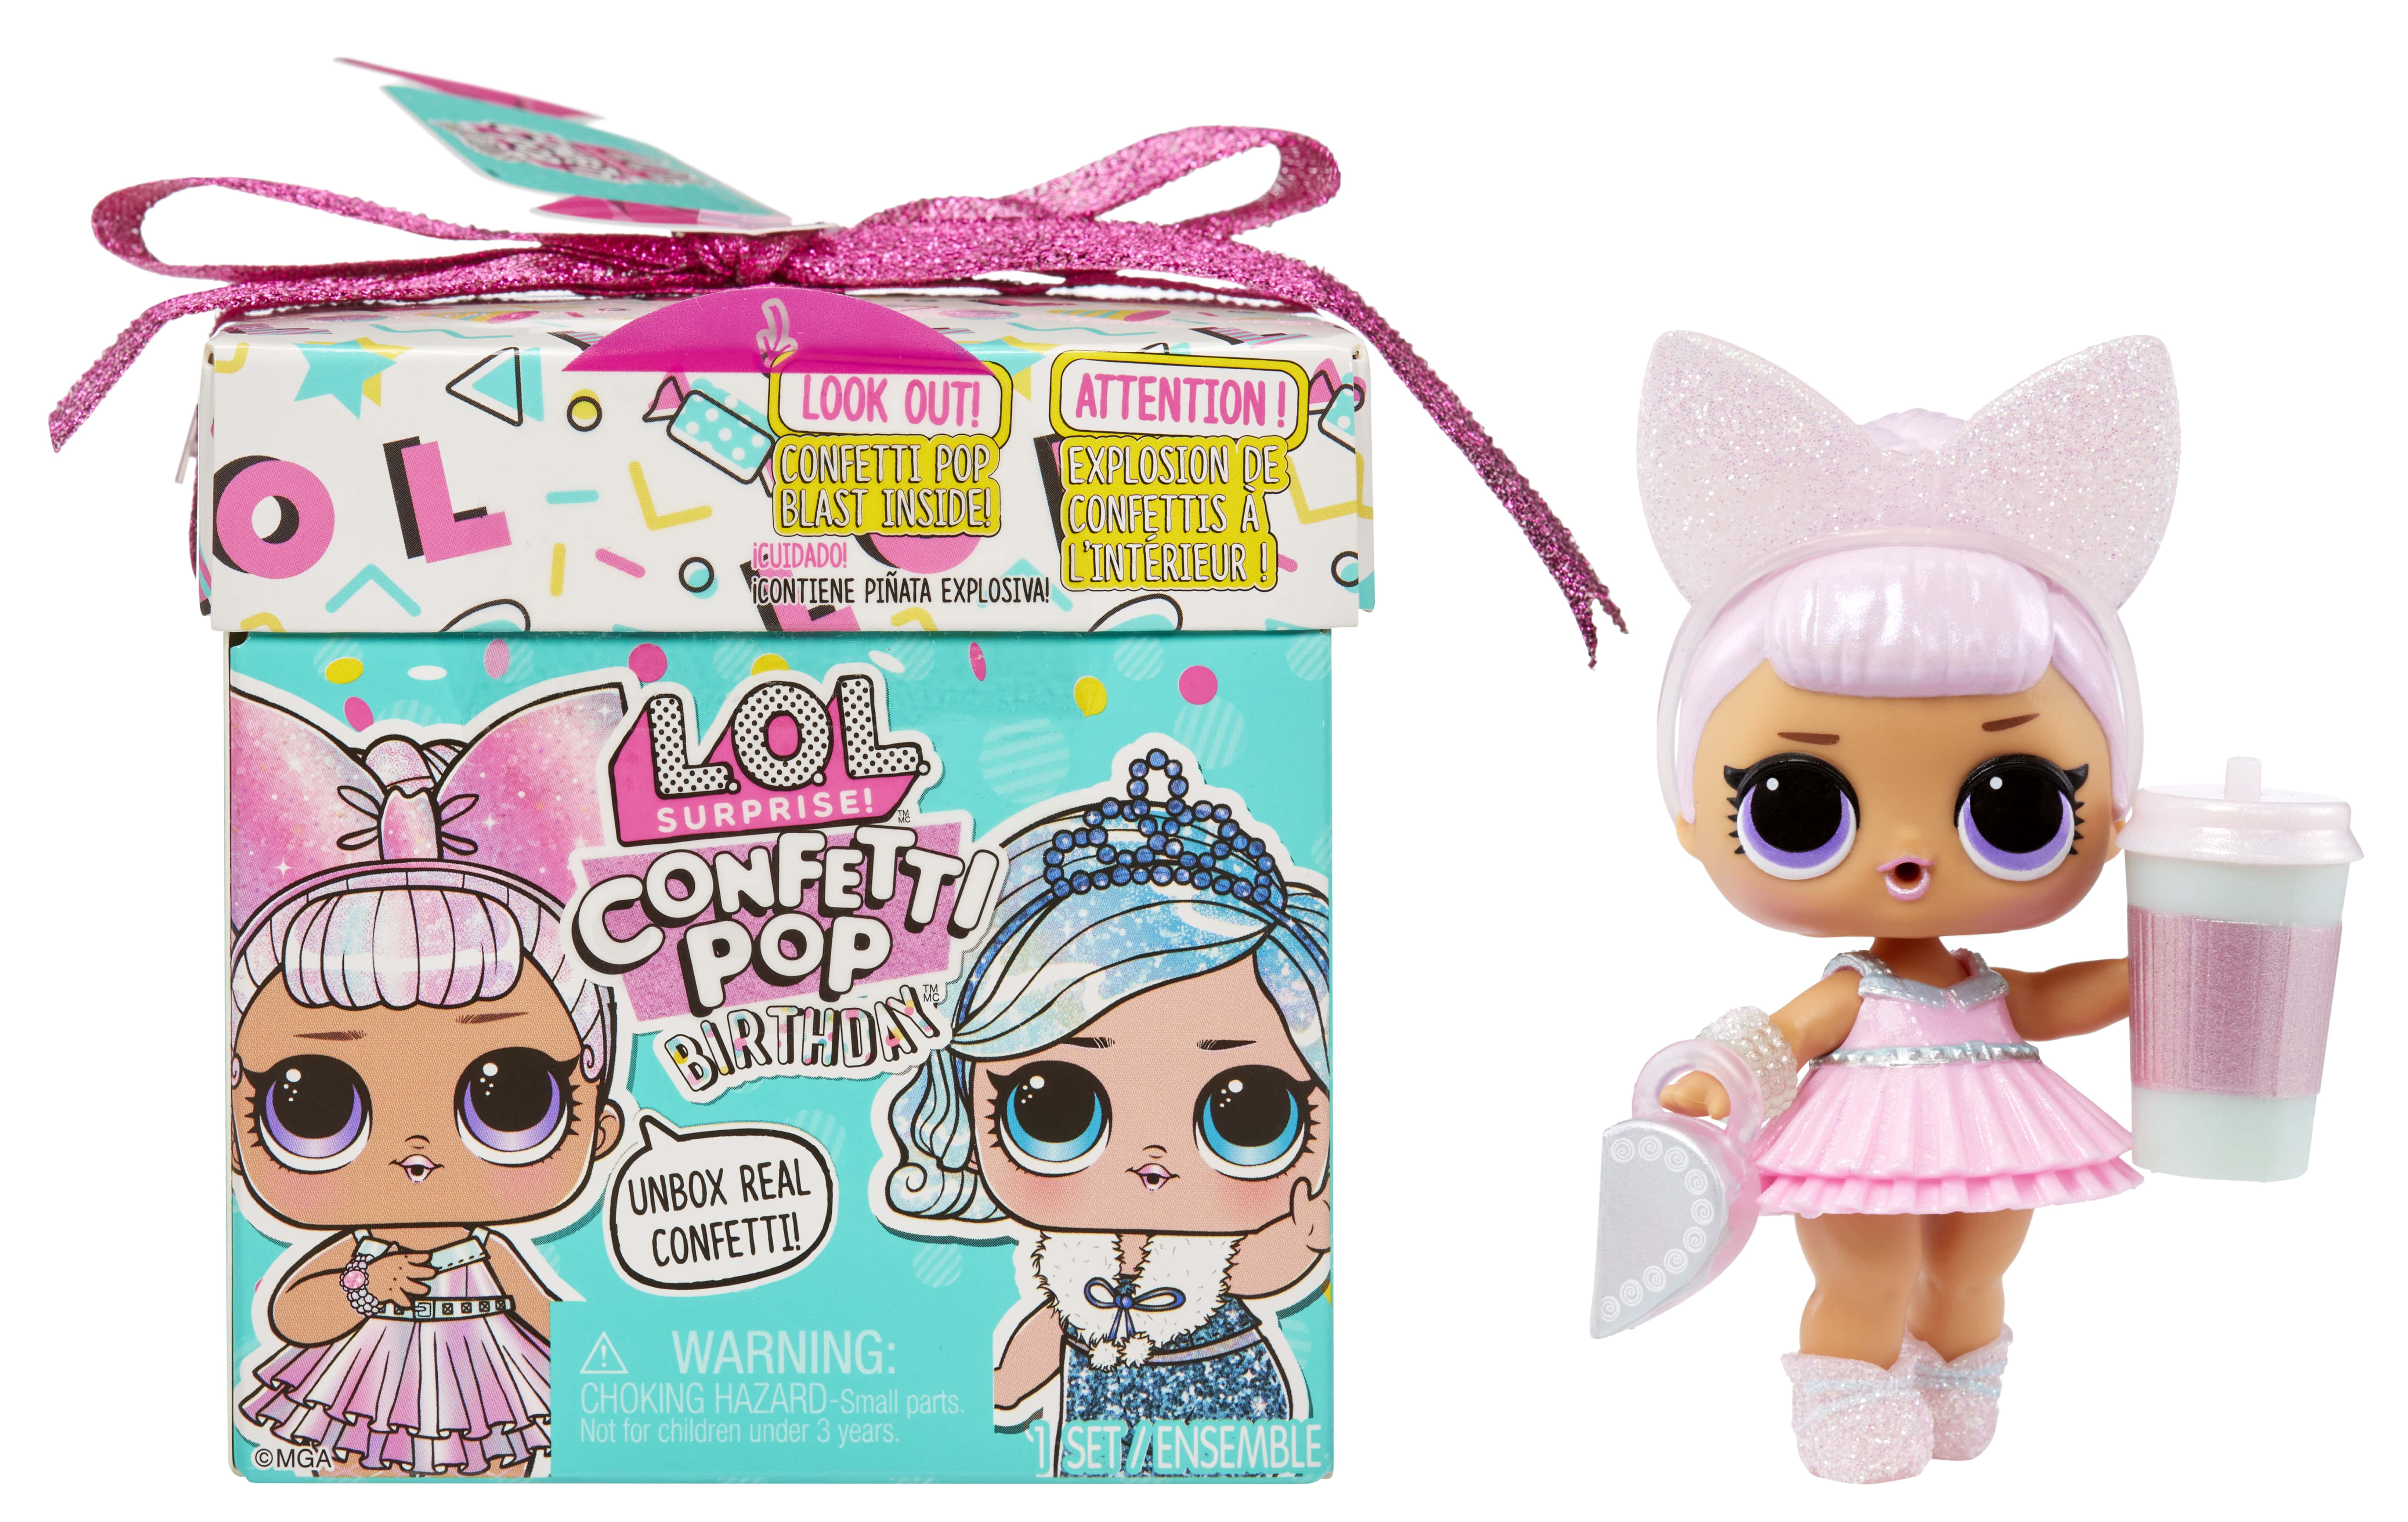 LOL Surprise! Confetti Pop Birthday- with Collectible Doll, 8 Surprises, Confetti Surprise Unboxing, Accessories, Limited Edition Doll, Present Box Packaging- Great Gift for Girls Age 4+